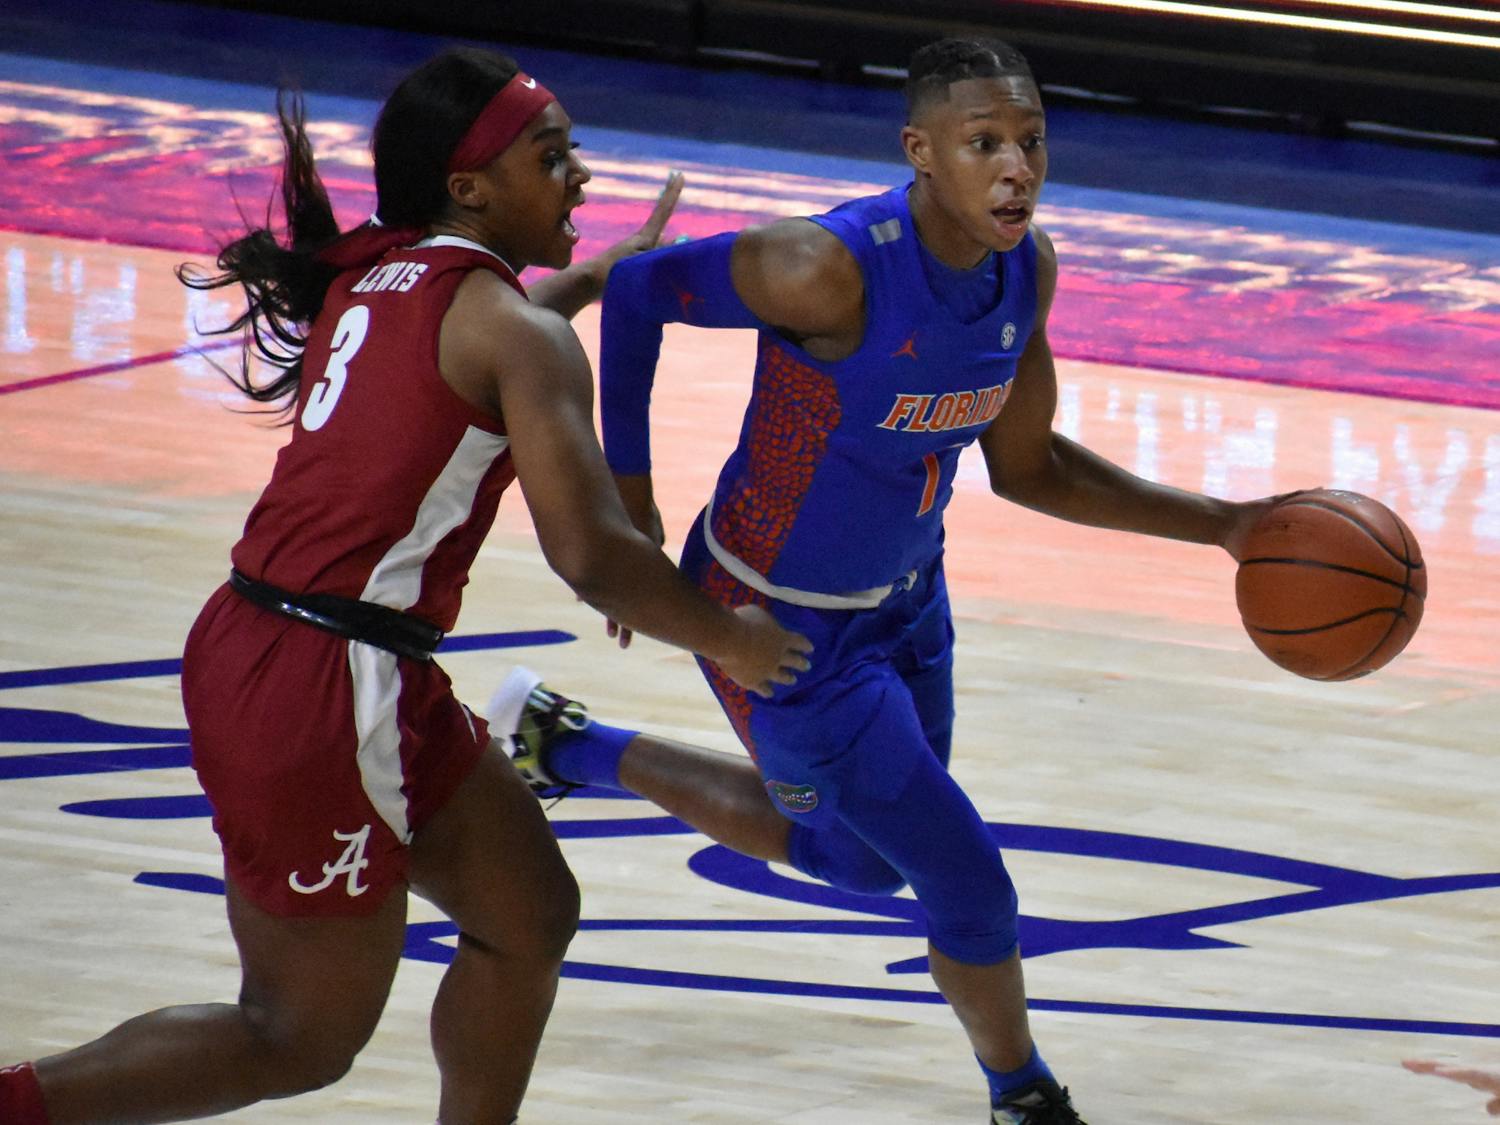 Florida&#x27;s Kiara Smith during a game against Alabama on Feb. 18, 2021. Smith will not compete with the team in the NCAA Tournament due to a season-ending injury.